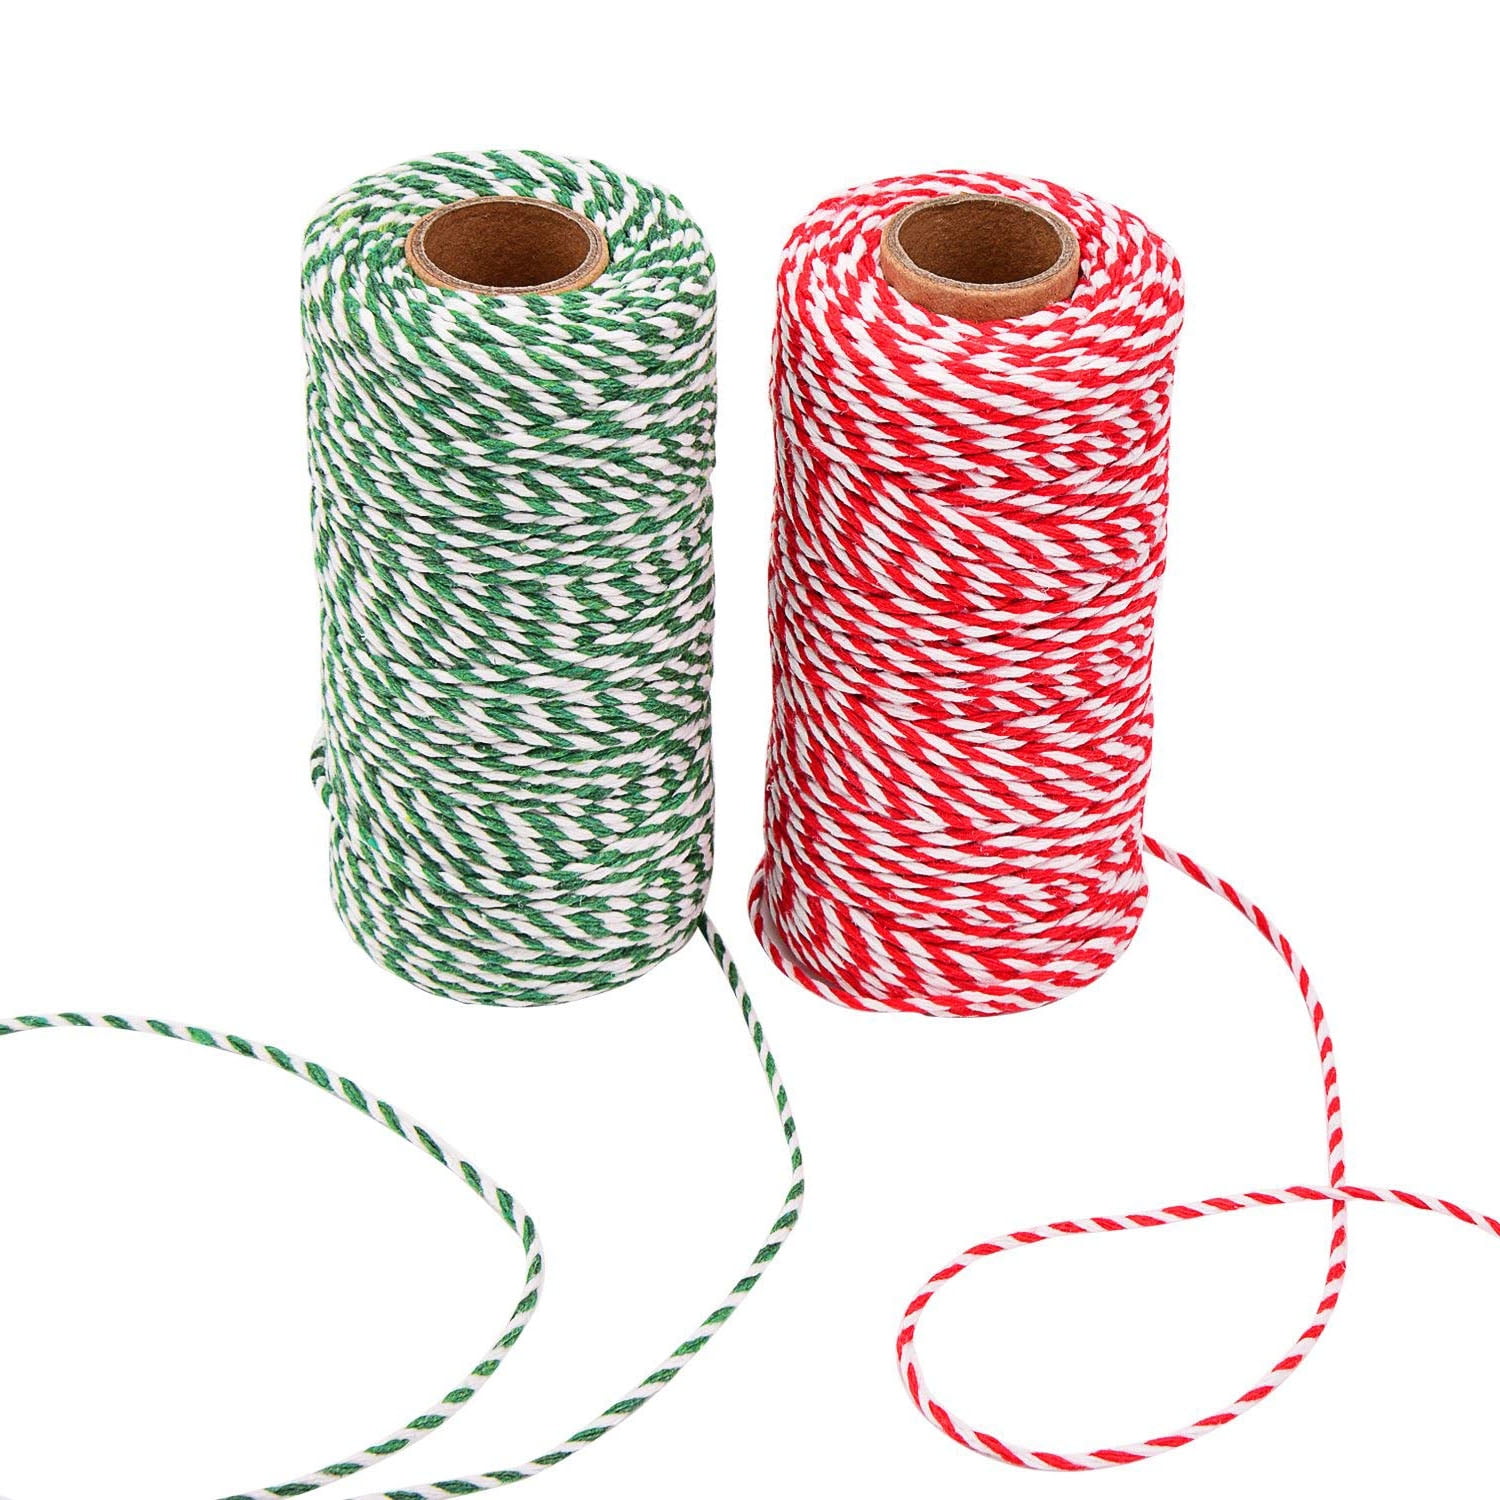 #12 2 Rolls 2mm Bakers Twine,Cotton Rope Cord String for Gift Wrapping Arts Crafts,Total 656 Feet